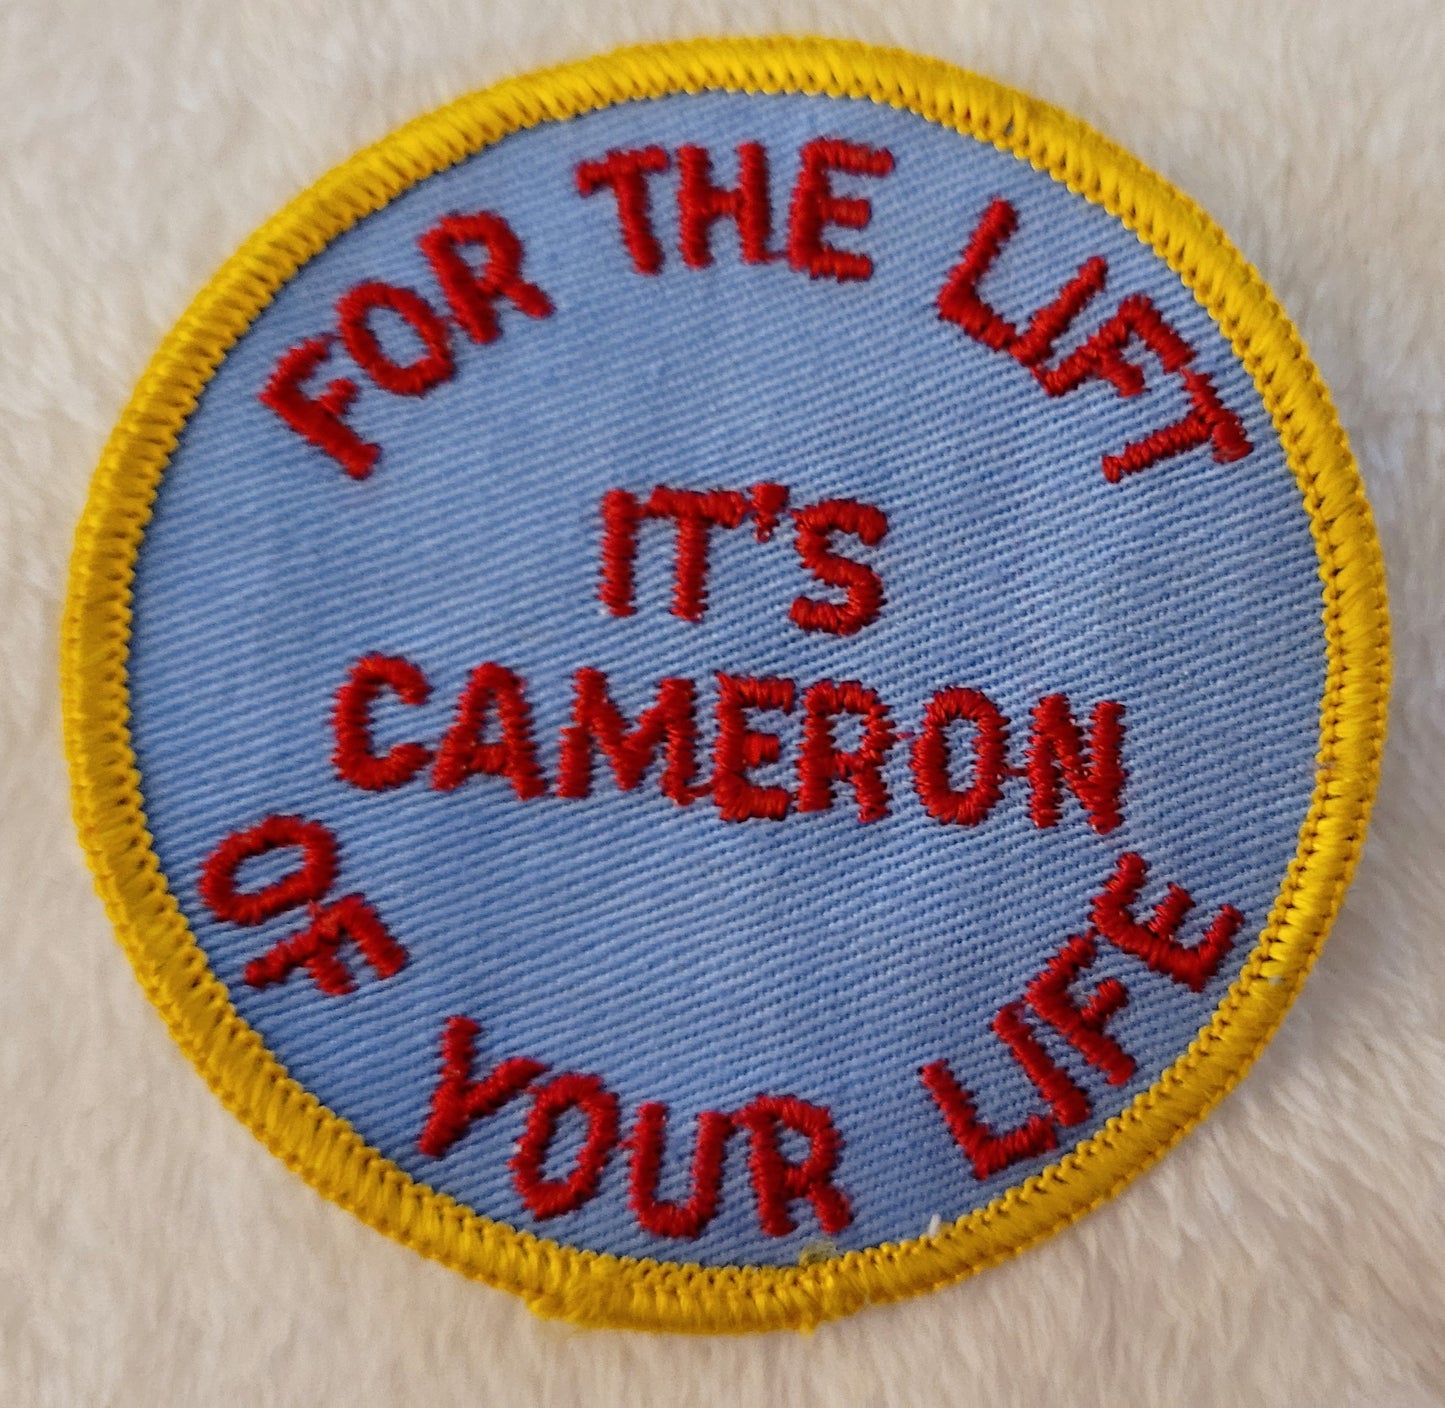 "For the Lift of Your Life, It's Cameron" *Hot Air Balloon 3" Round Patch